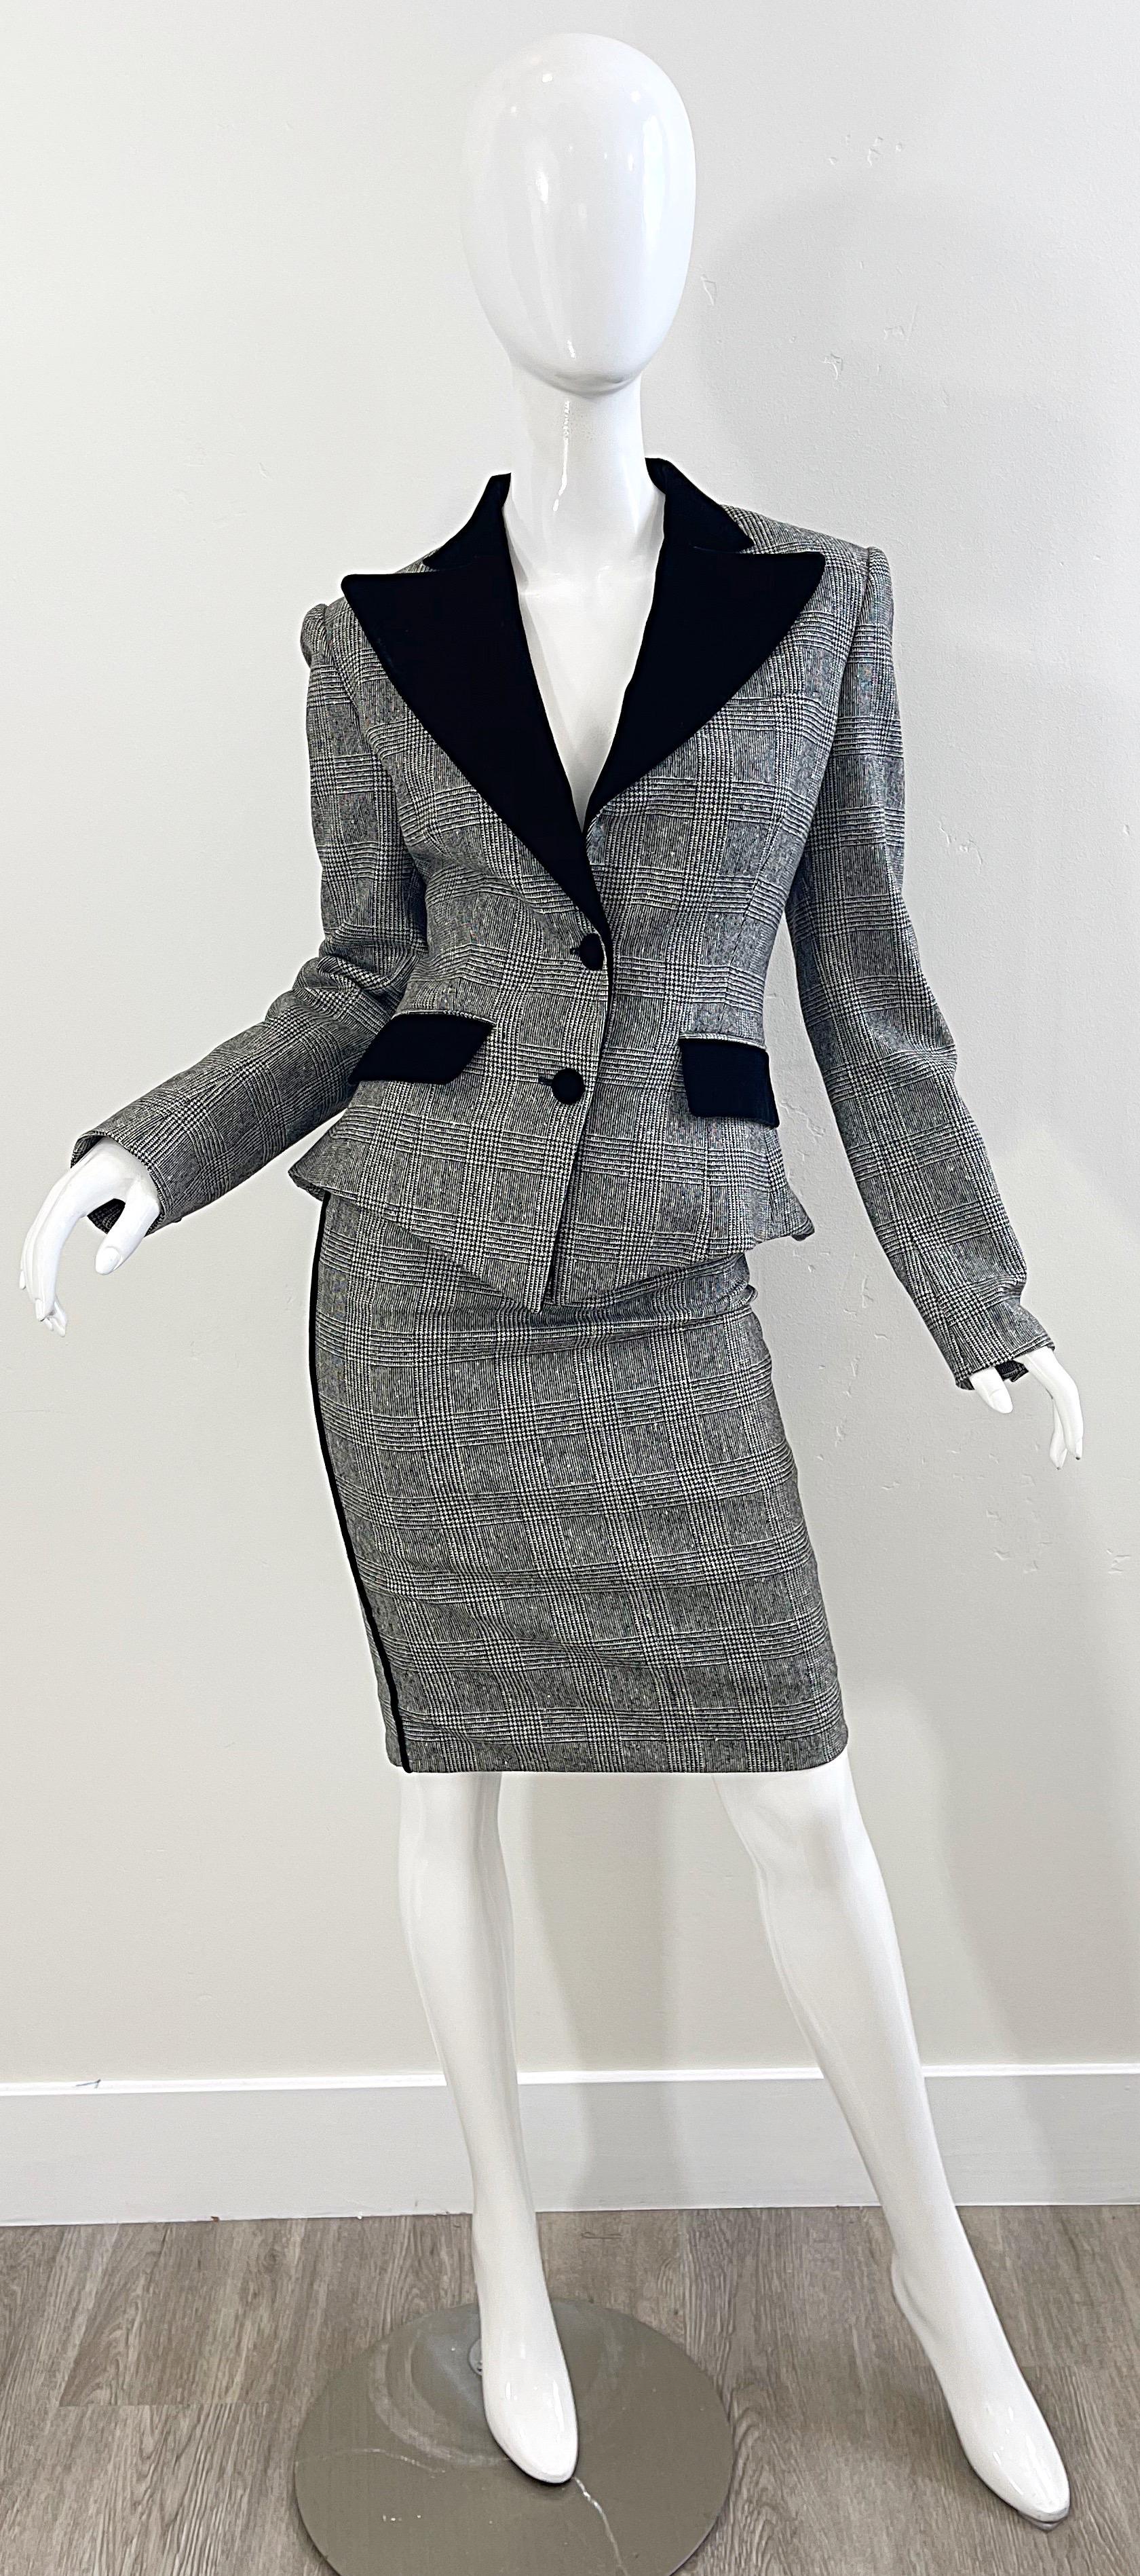 Chic never worn early 2000s ROBERTO CAVALLI black and white houndstooth plaid print wool and velvet skirt suit ! Jacket features a peplum style in the back. Black velvet pocket, buttons, lapels, and down the side of the skirt. Pockets at each side